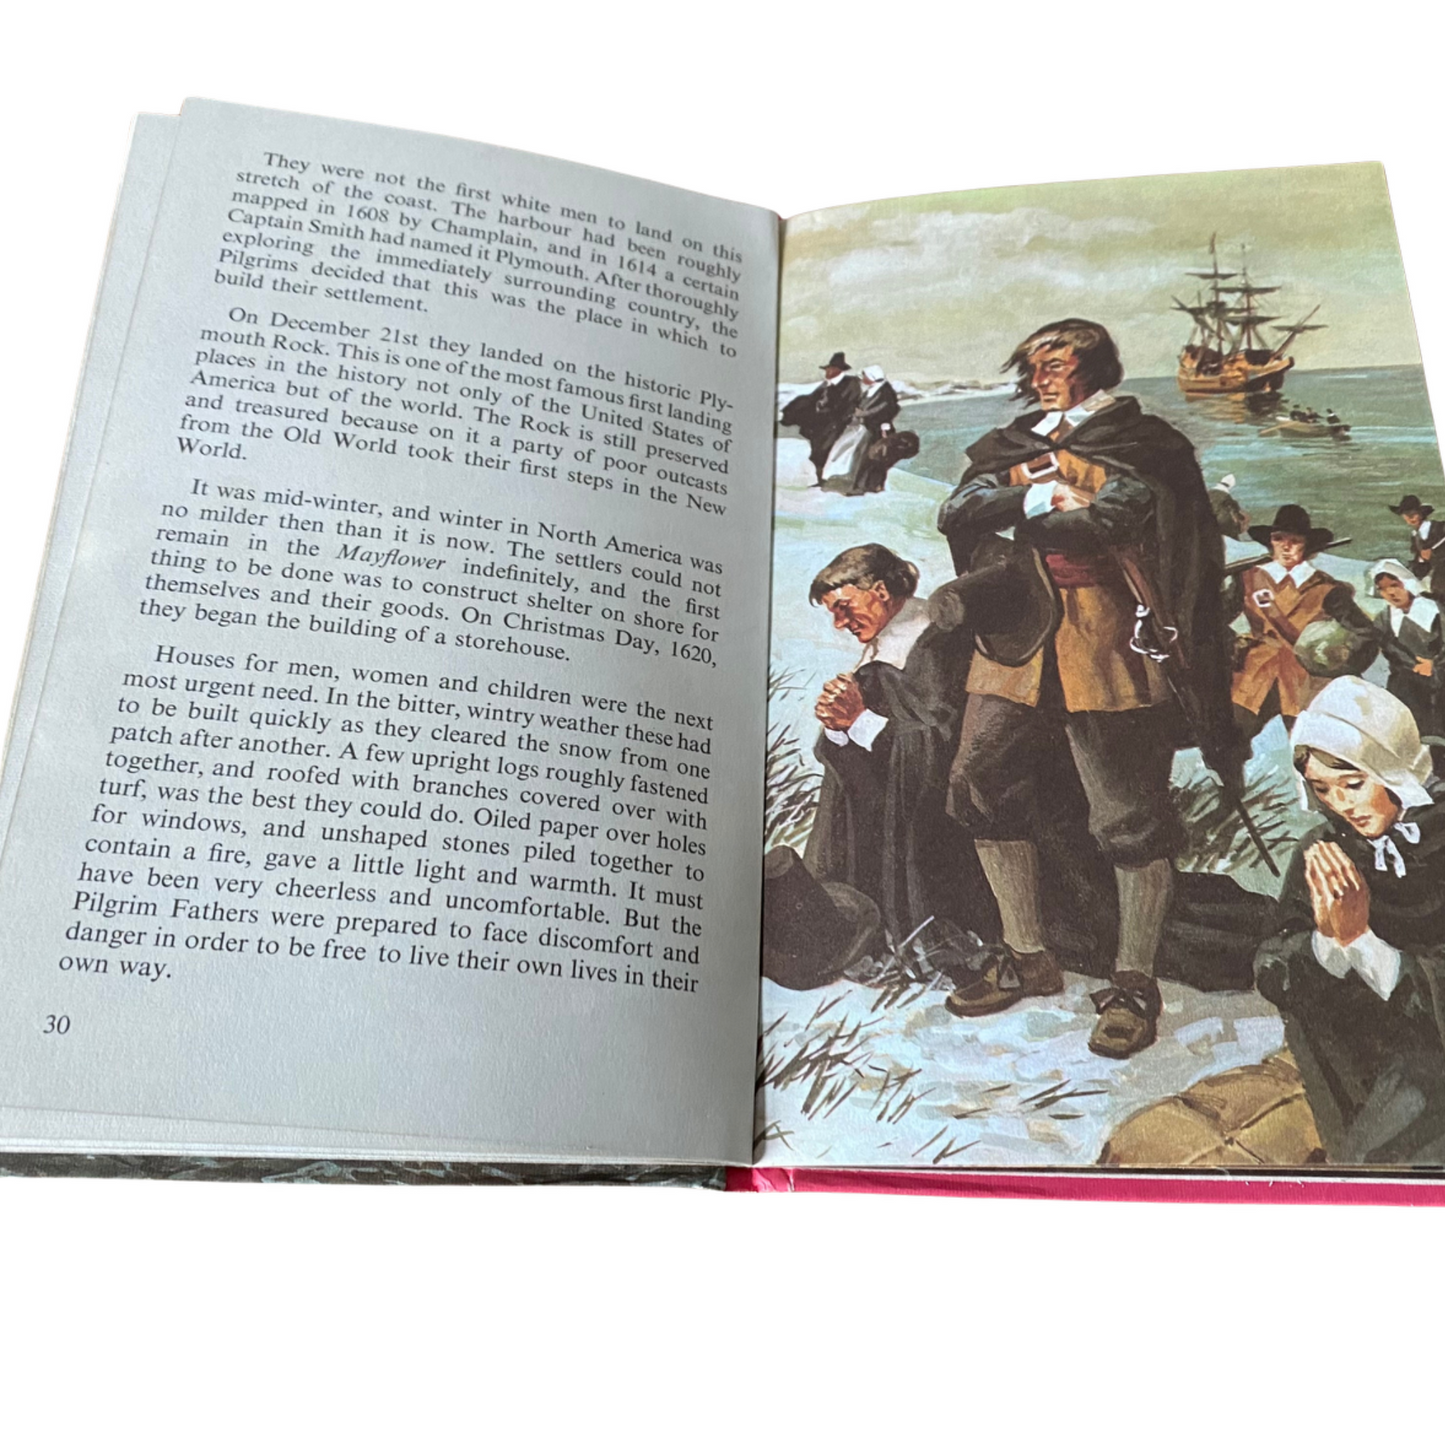 Vintage 1960s ladybird book, The Pilgrim Fathers,  Adventure from History. Series 561